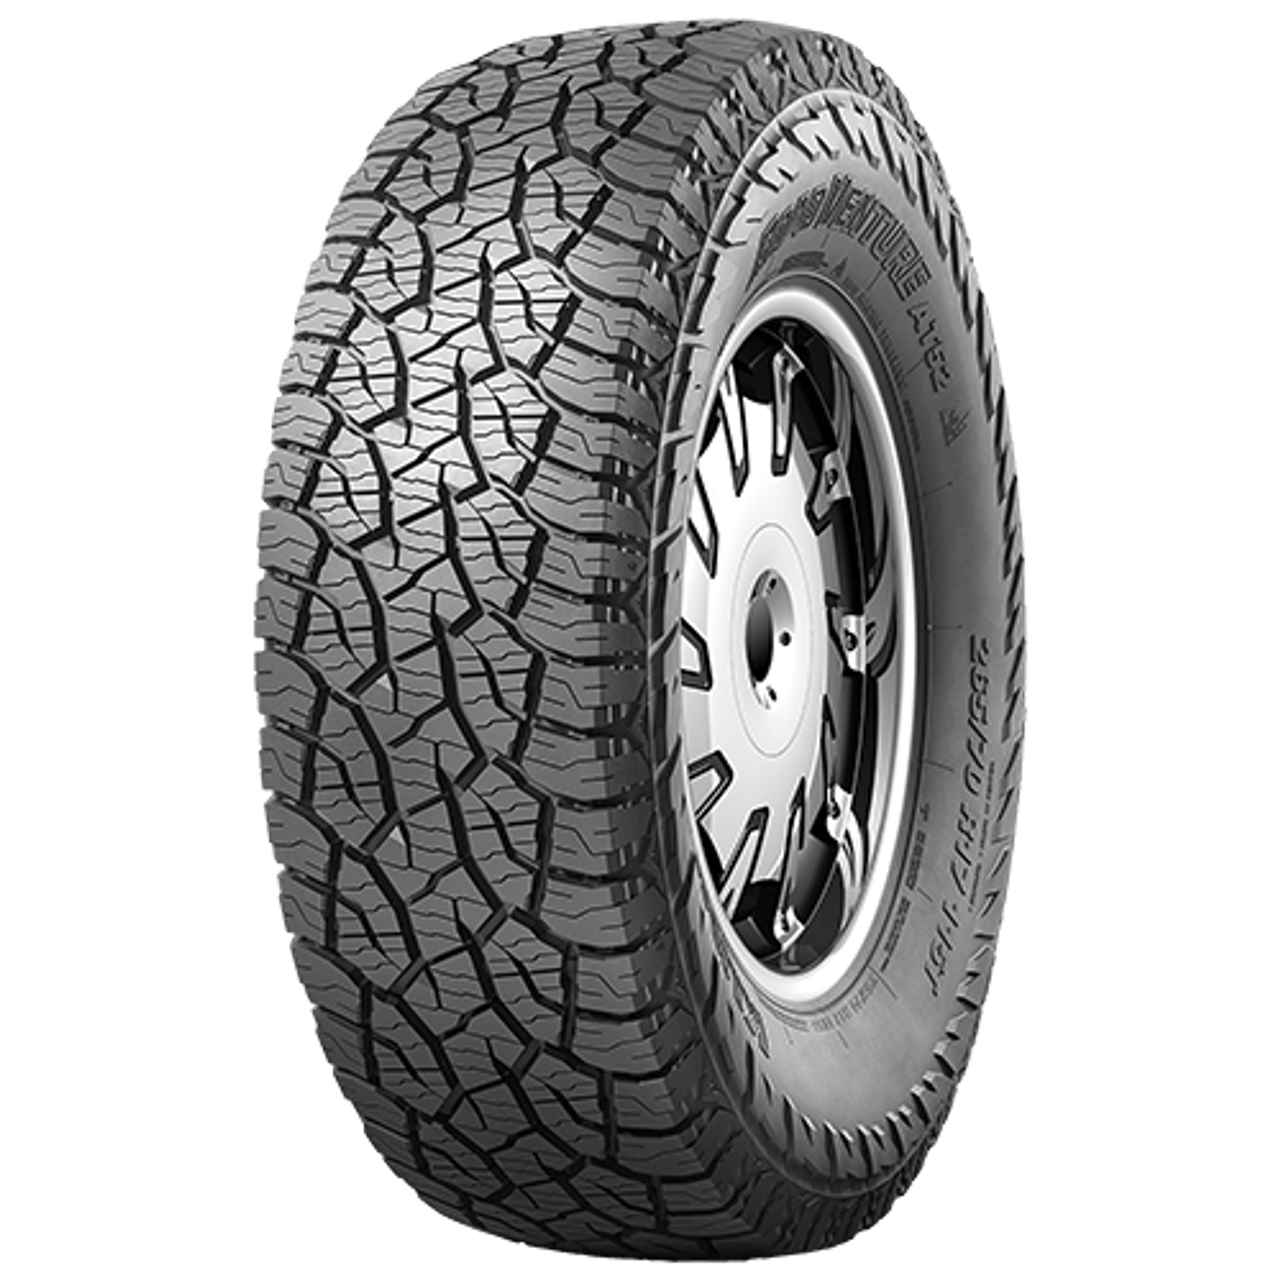 KUMHO ROAD VENTURE AT52 265/65R17 112T BSW